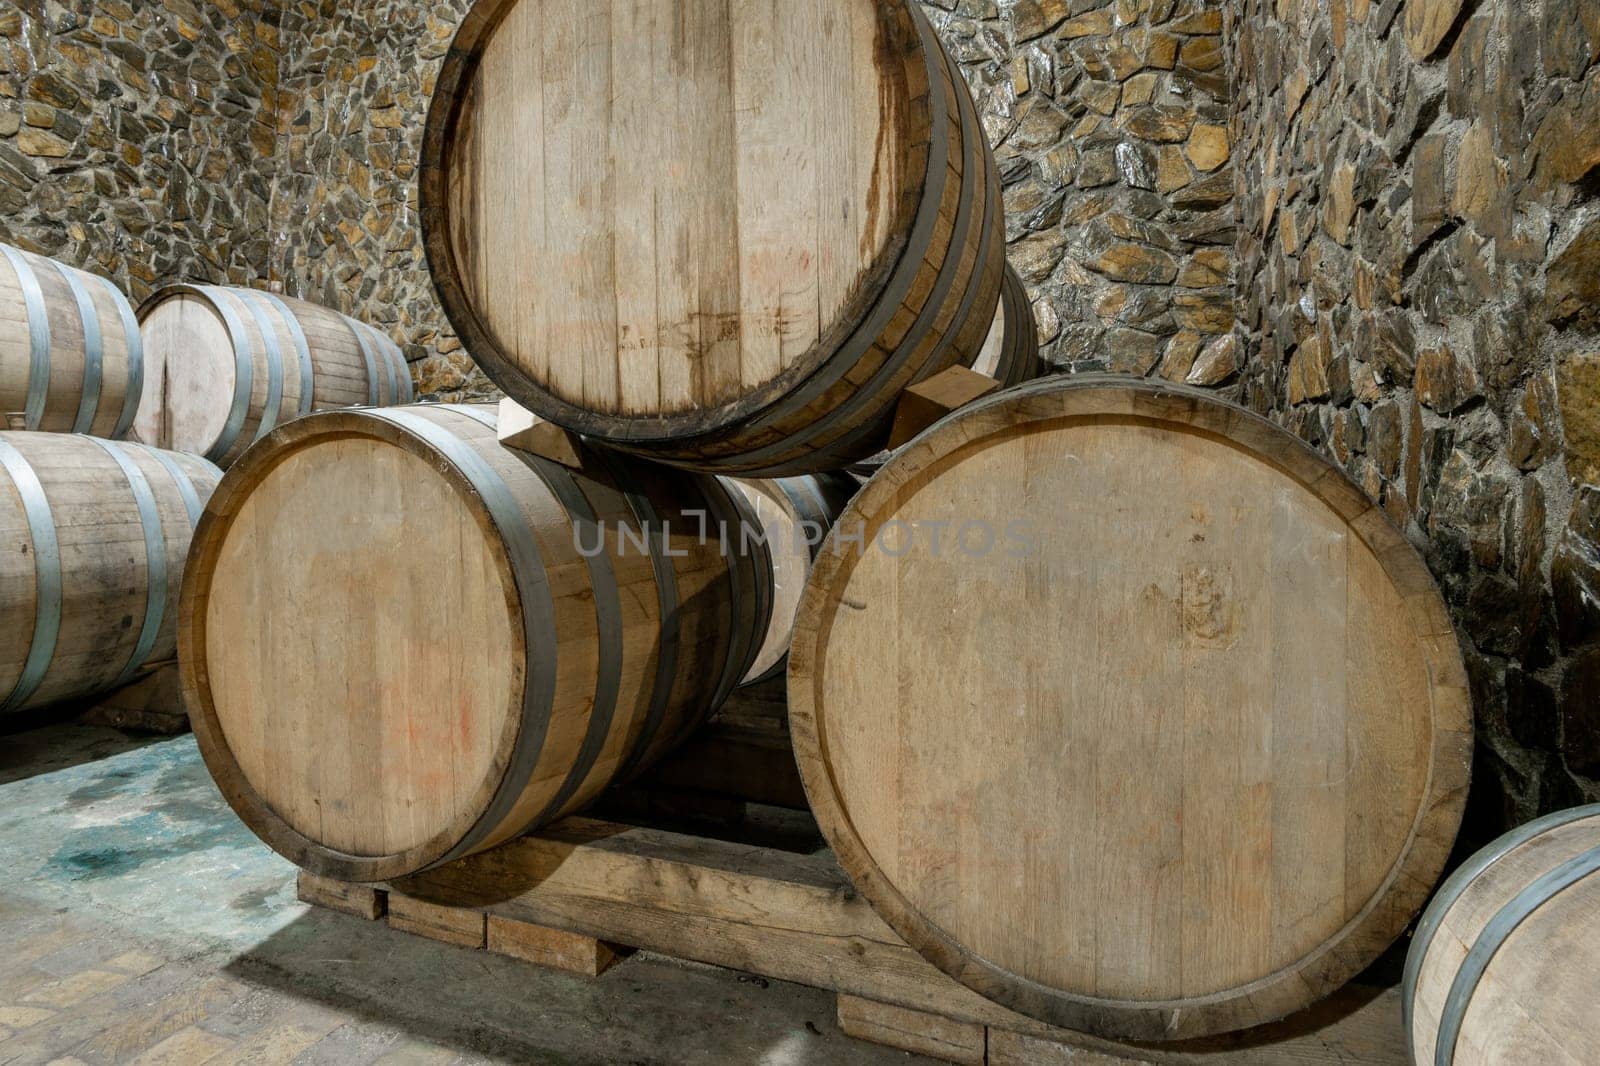 The wooden wine barrels in a wine factory